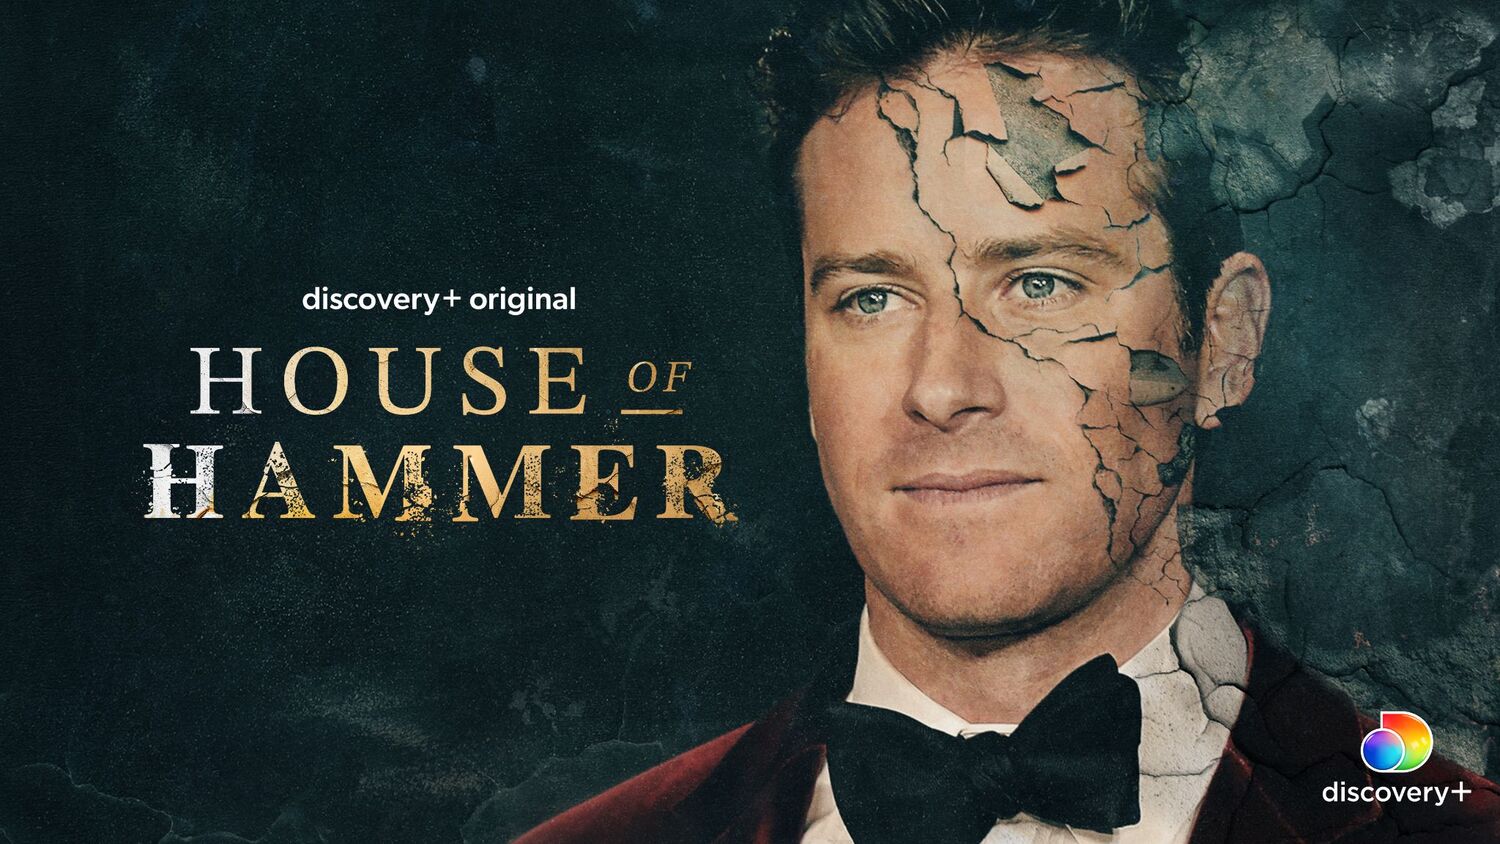 [News] HOUSE OF HAMMER Docuseries Premiering September 2 on Discovery+